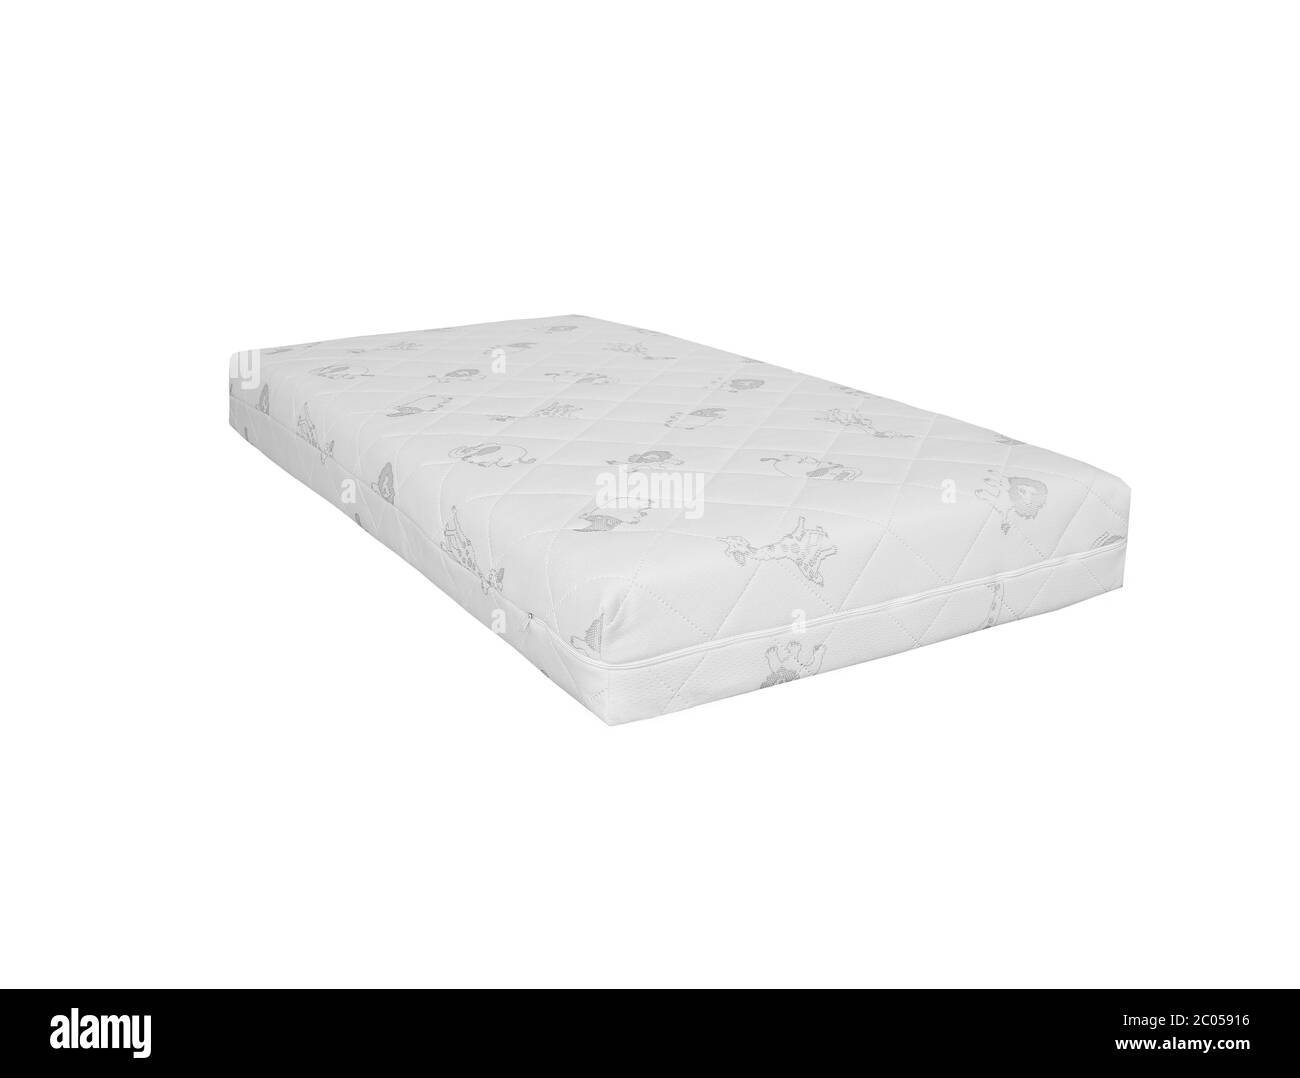 Orthopedic children's mattress in a protective cover. Stock Photo